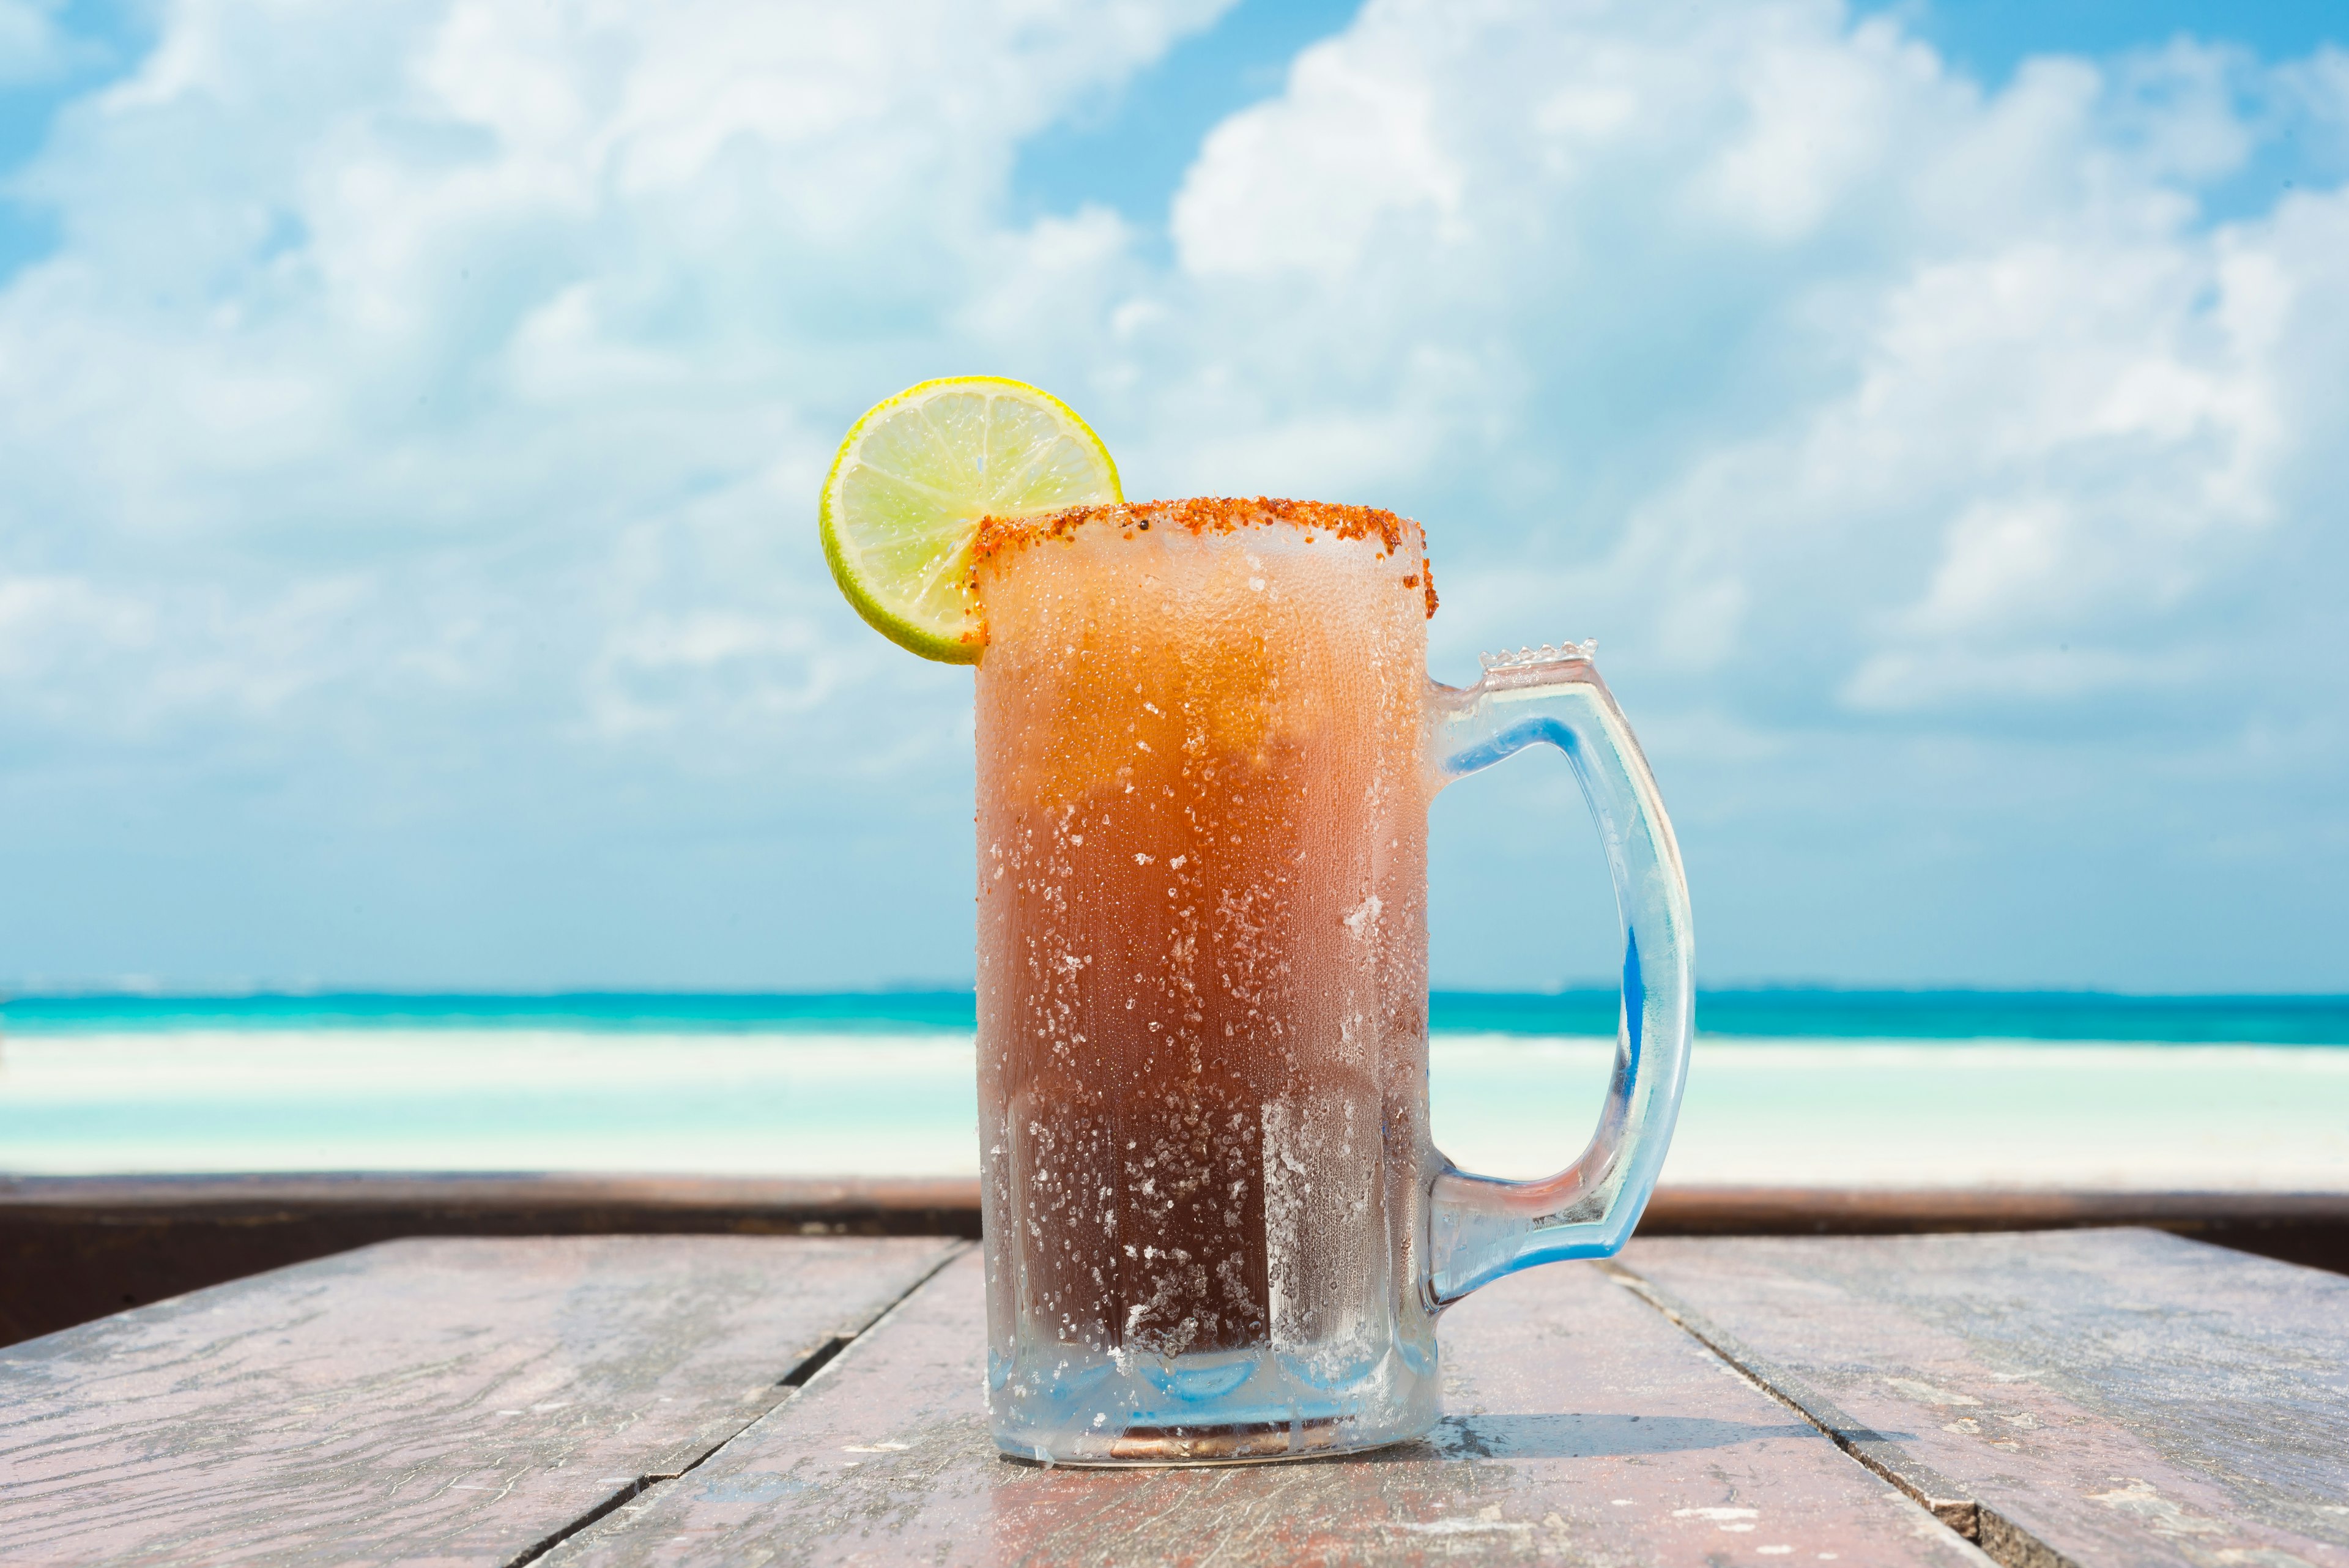 "Michelada" beer jar with a lemon slice on a blue sky with clouds